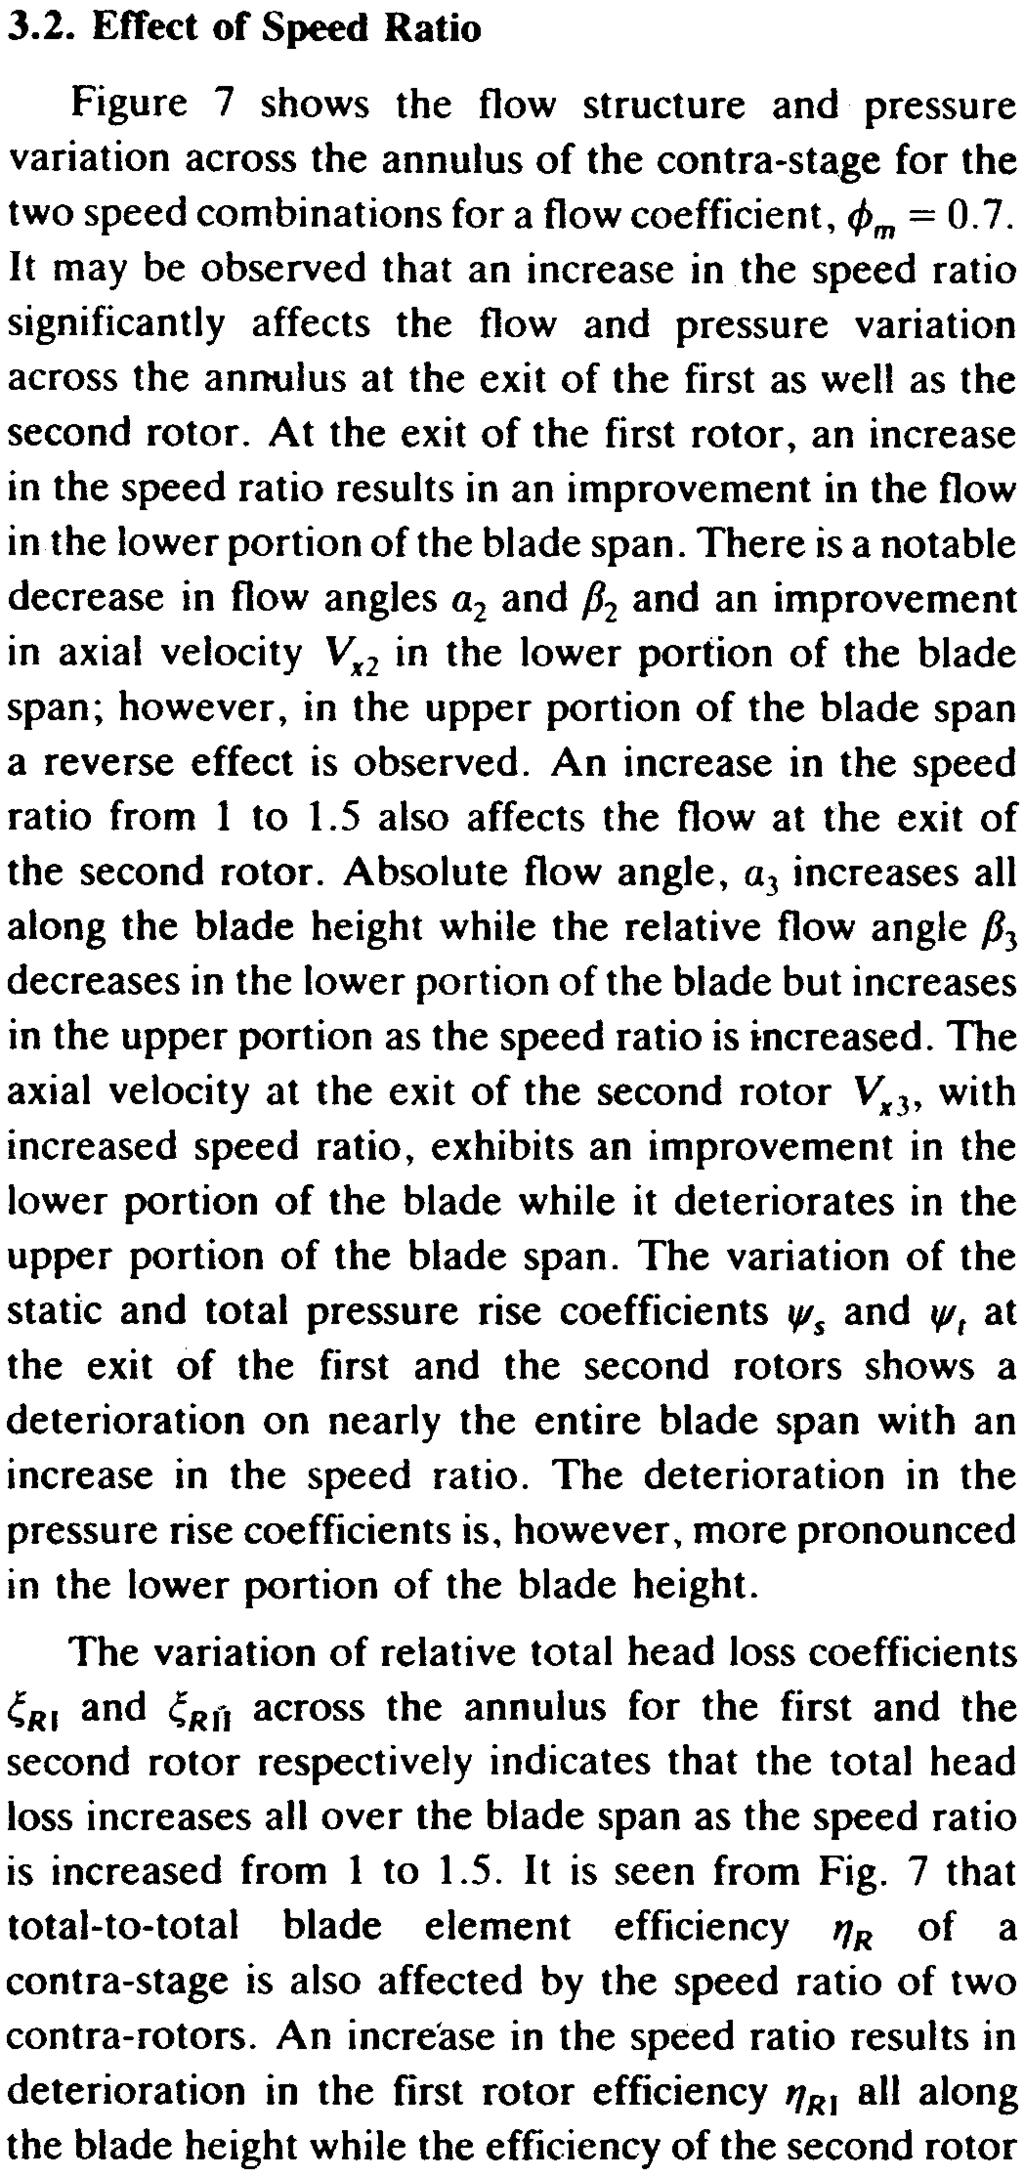 25 It may be noted from Table 2 that the first rotor stall point is shifted towards a lower flow coefficient as the speed ratio is increased from.66 to 1.5. It is also noted that in a large axial gap case the contra-stage stall point has the tendency to shift towards a higher flow coefficient as the speed ratio between contra-rotors is increased.